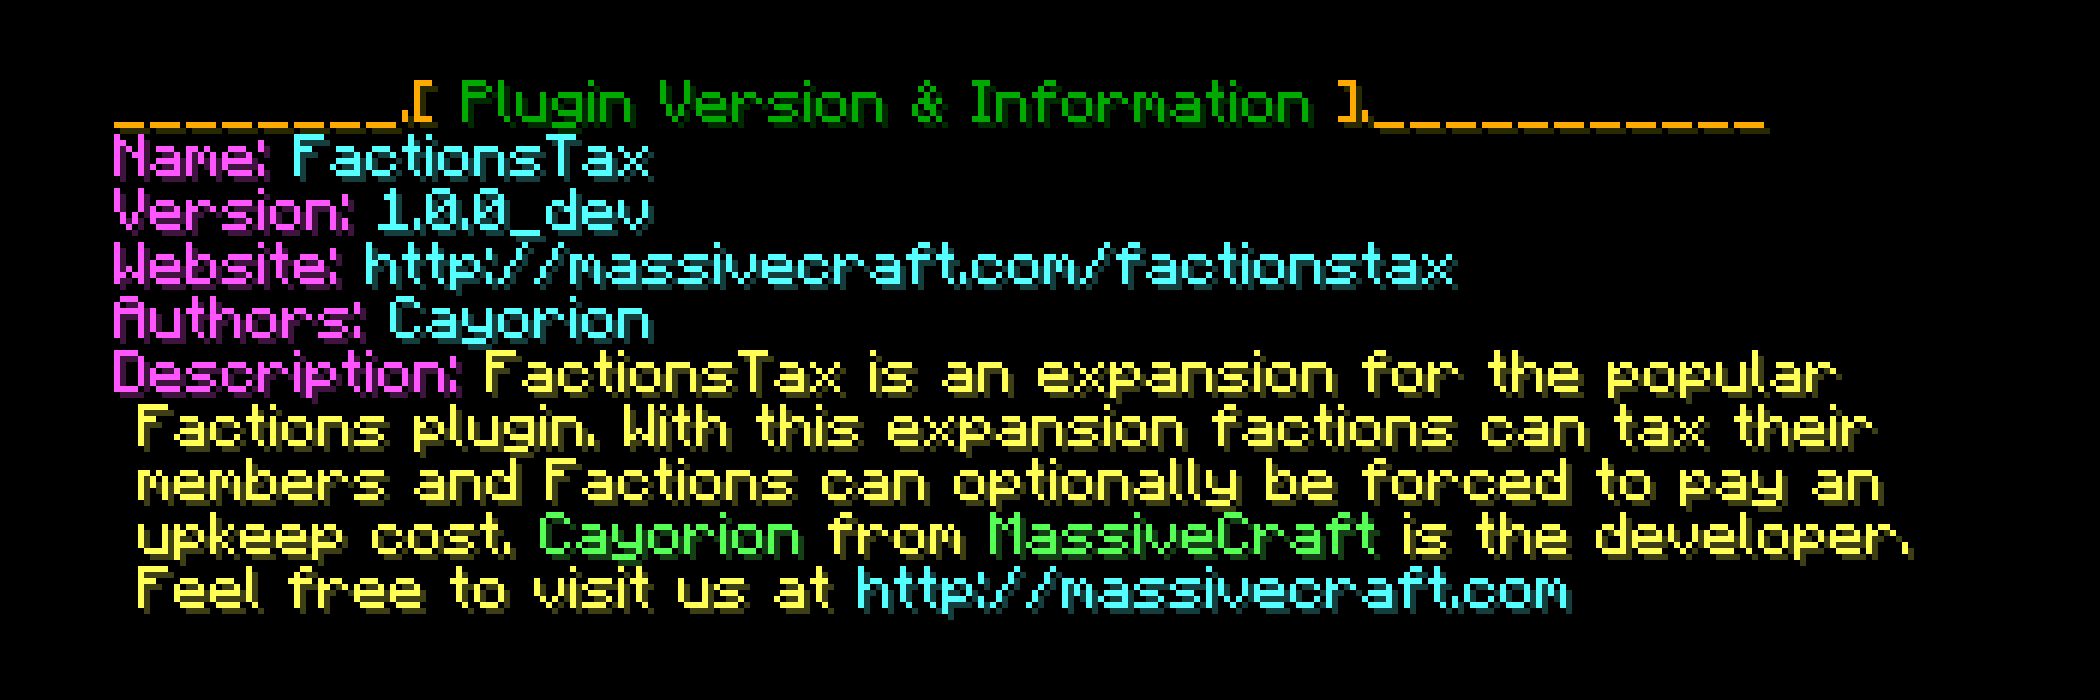 factionstax-command-version.png